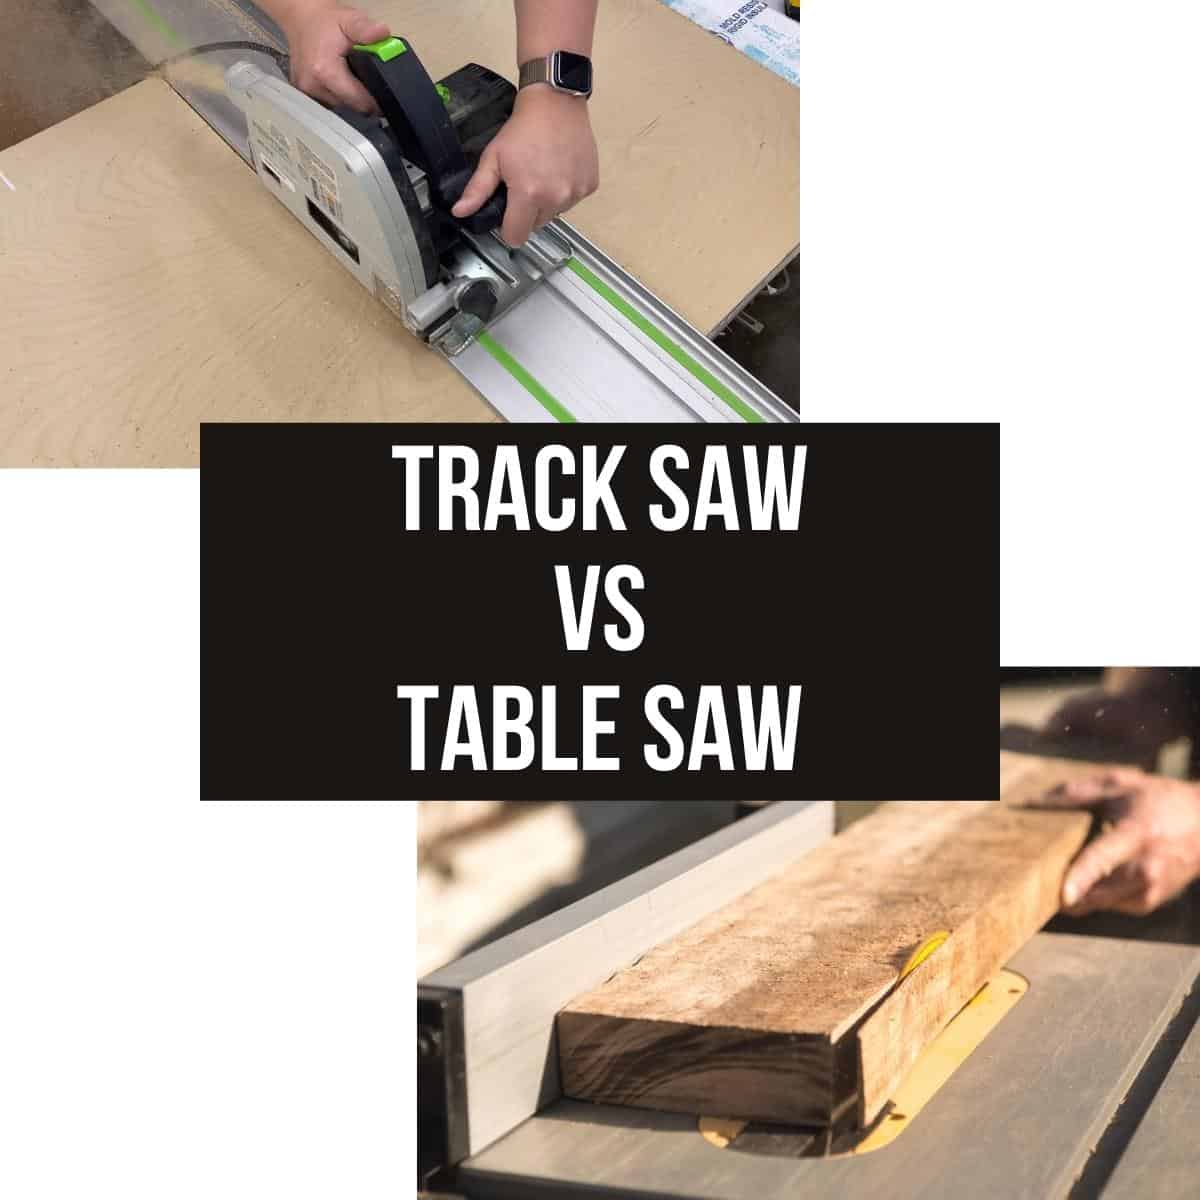 is a track saw better than a table saw?